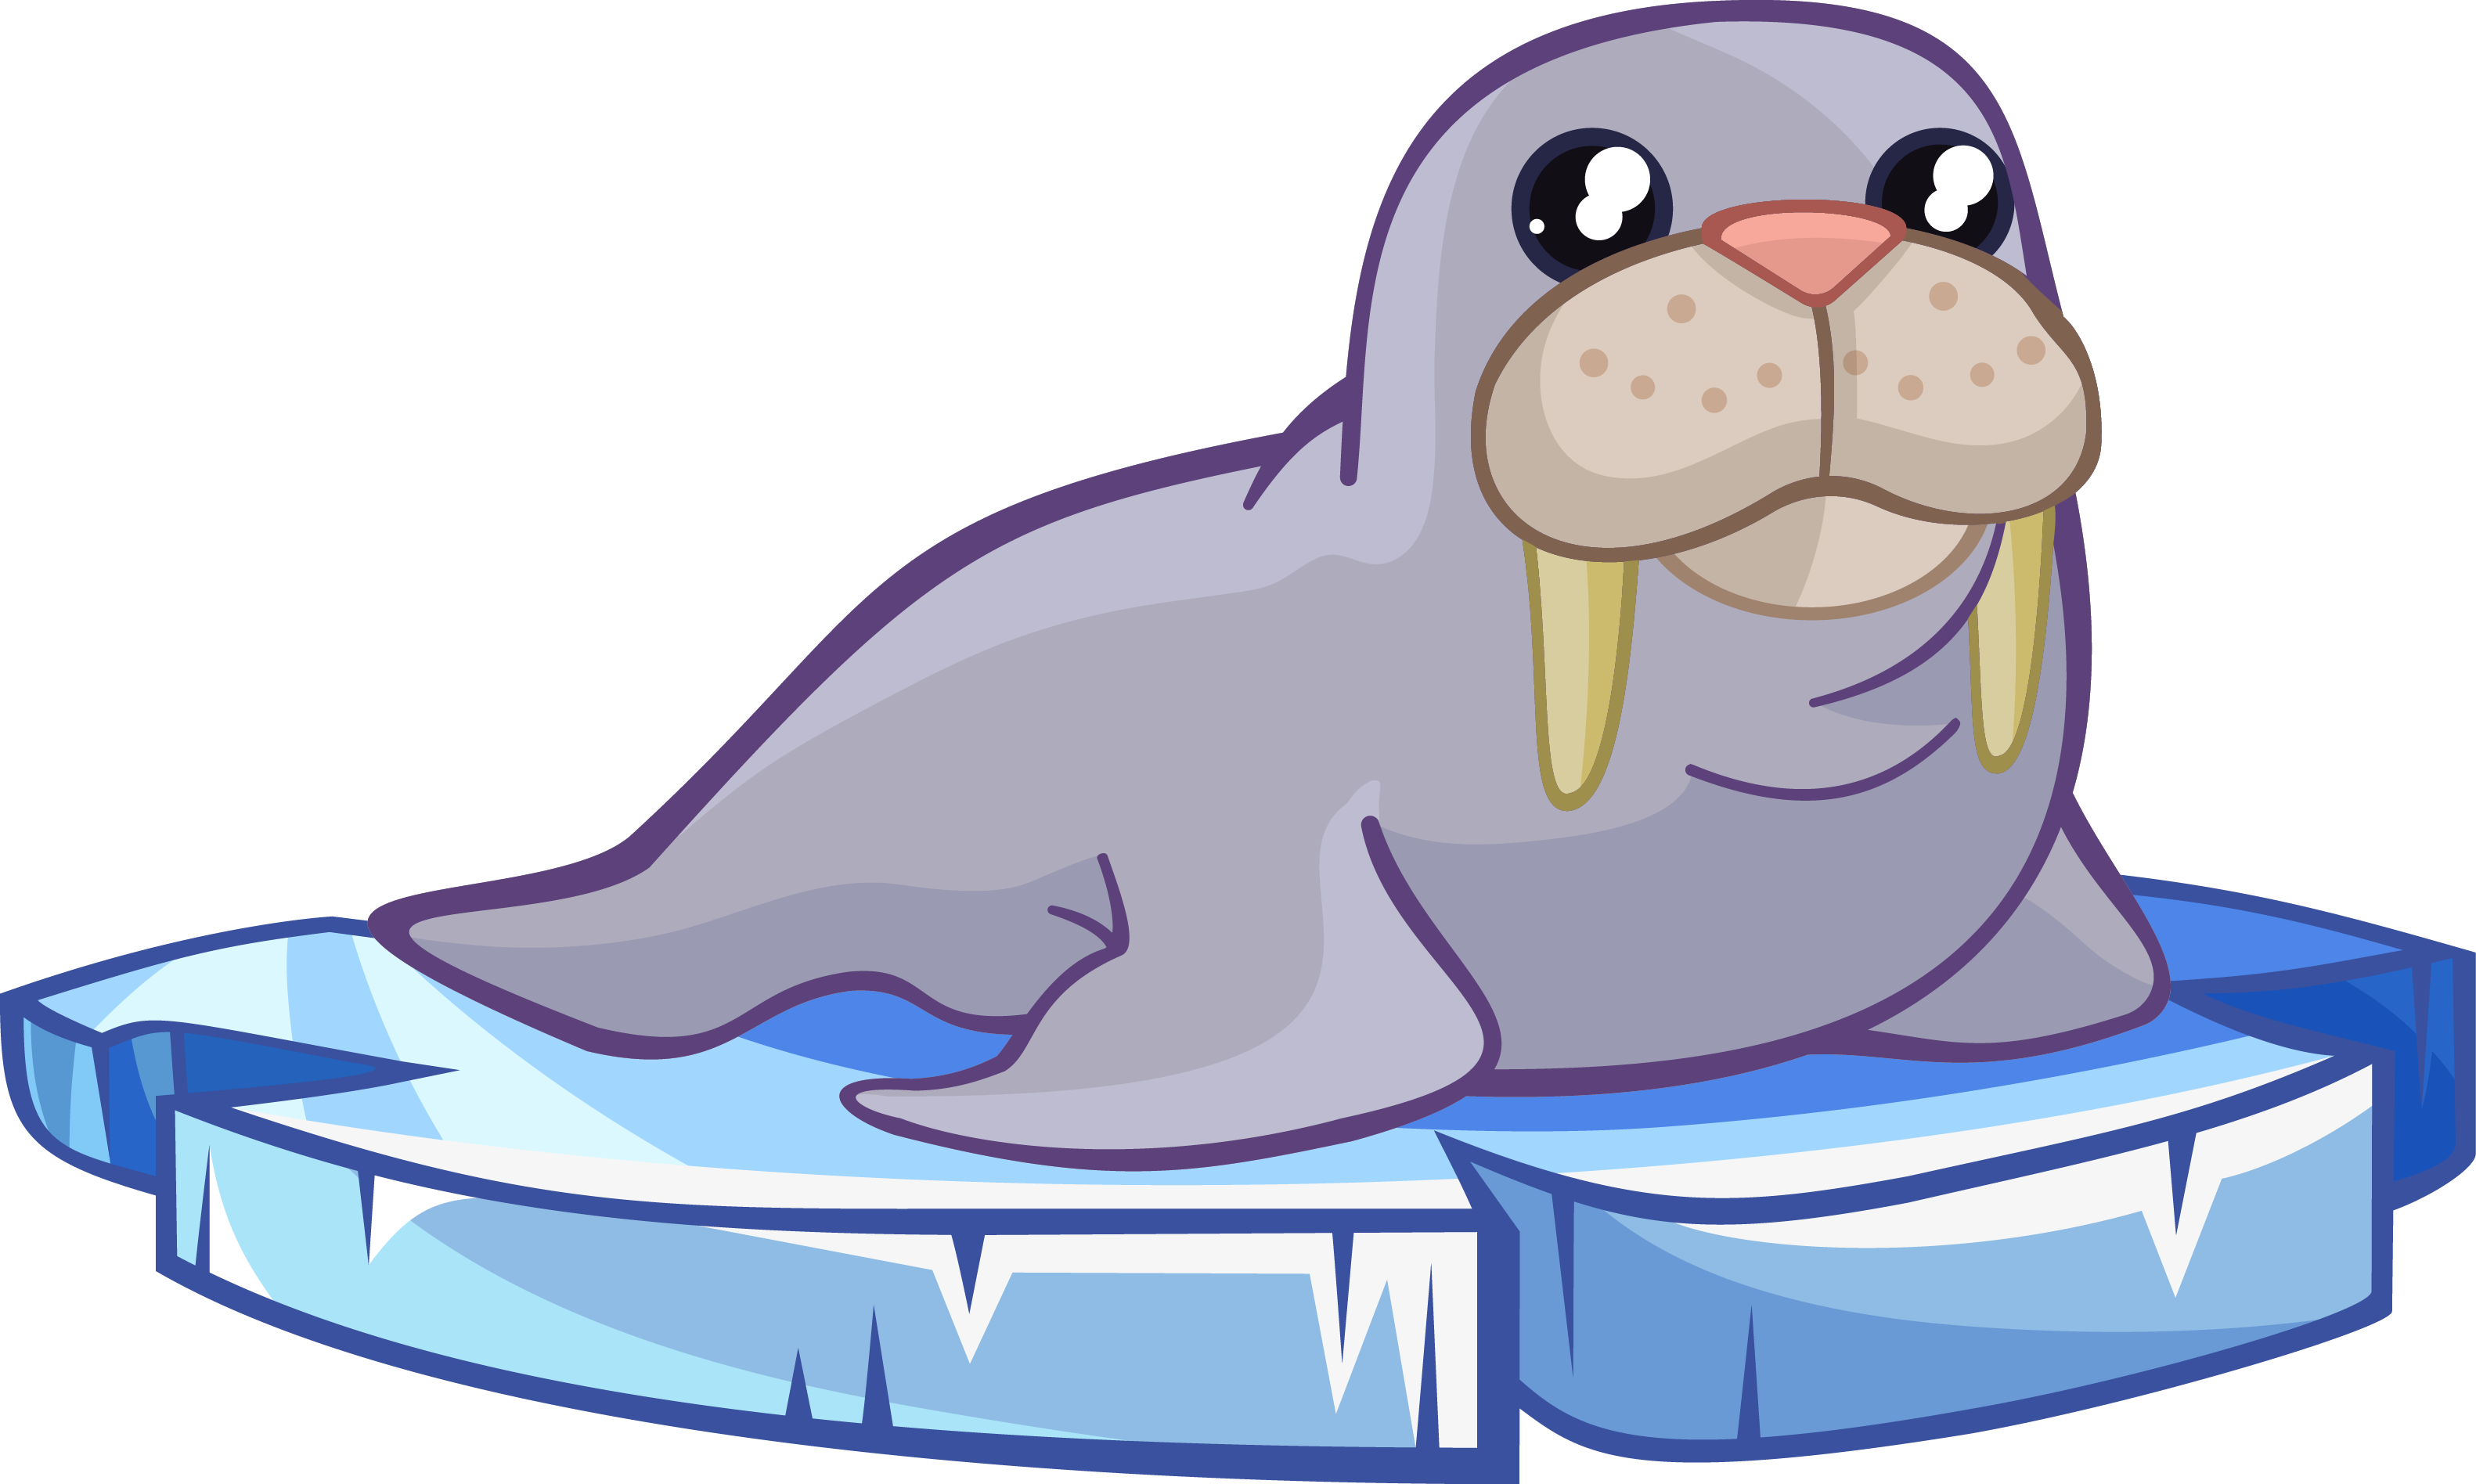 Walrus clipart clip art. Free to use cliparts